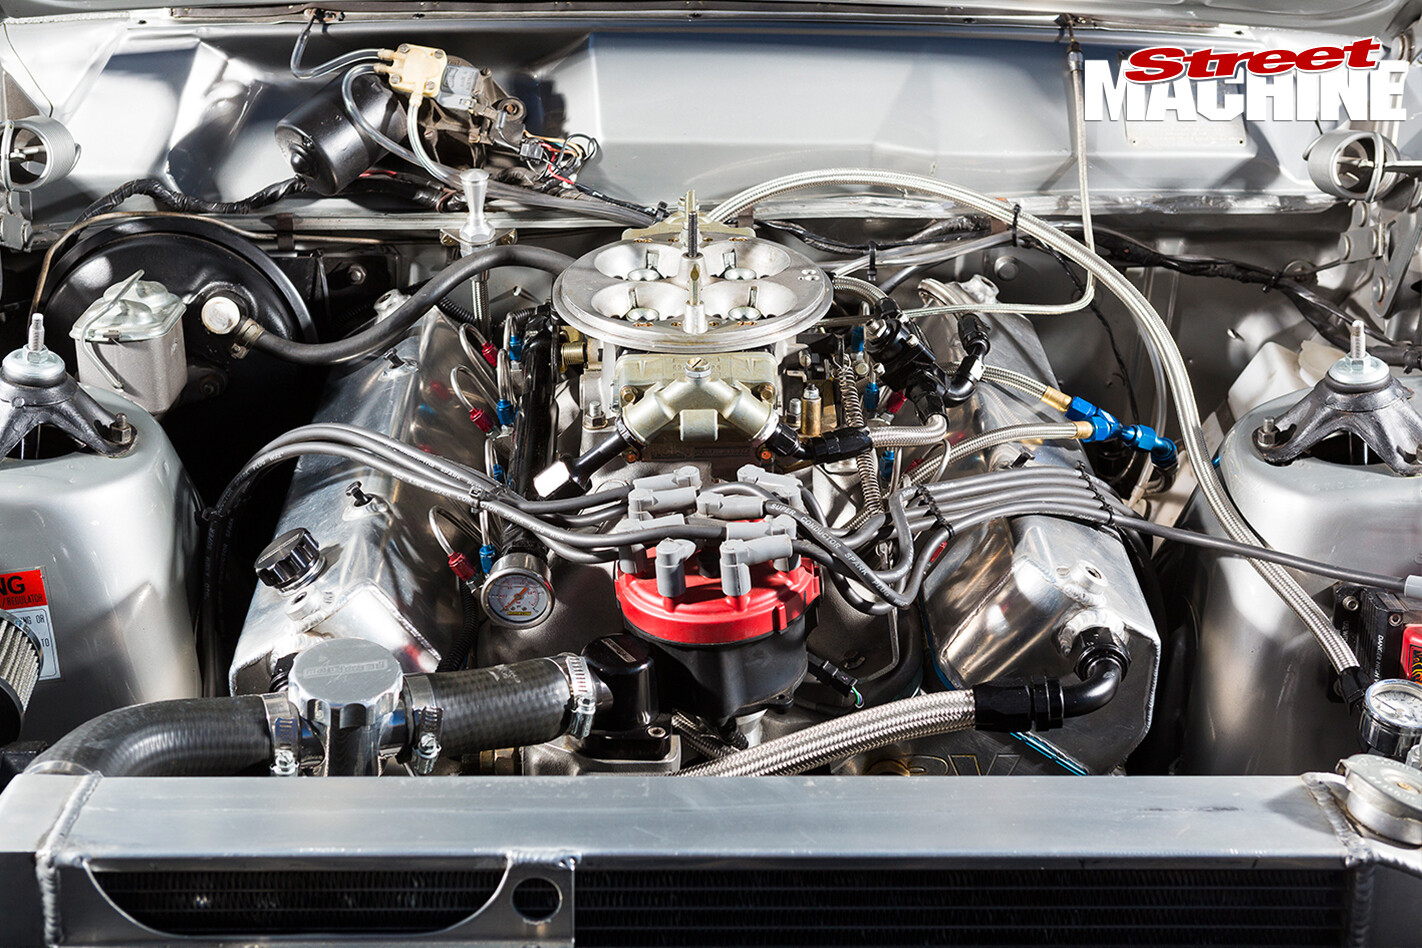 1970-Ford -XW-Falcon -engine -detail